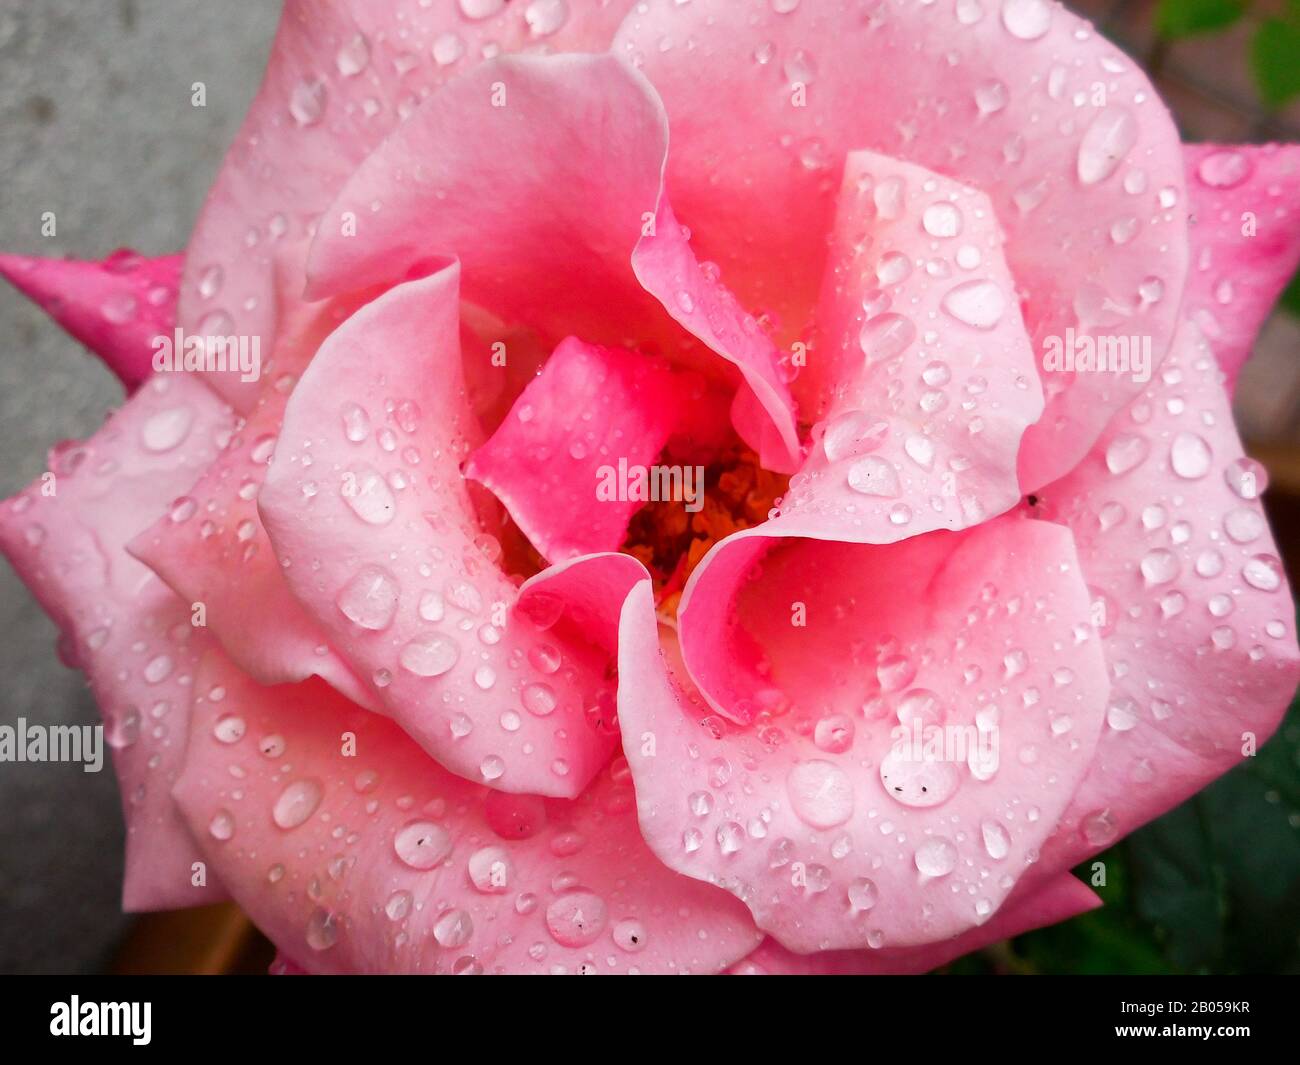 pink rose with water drops portrait close up Stock Photo